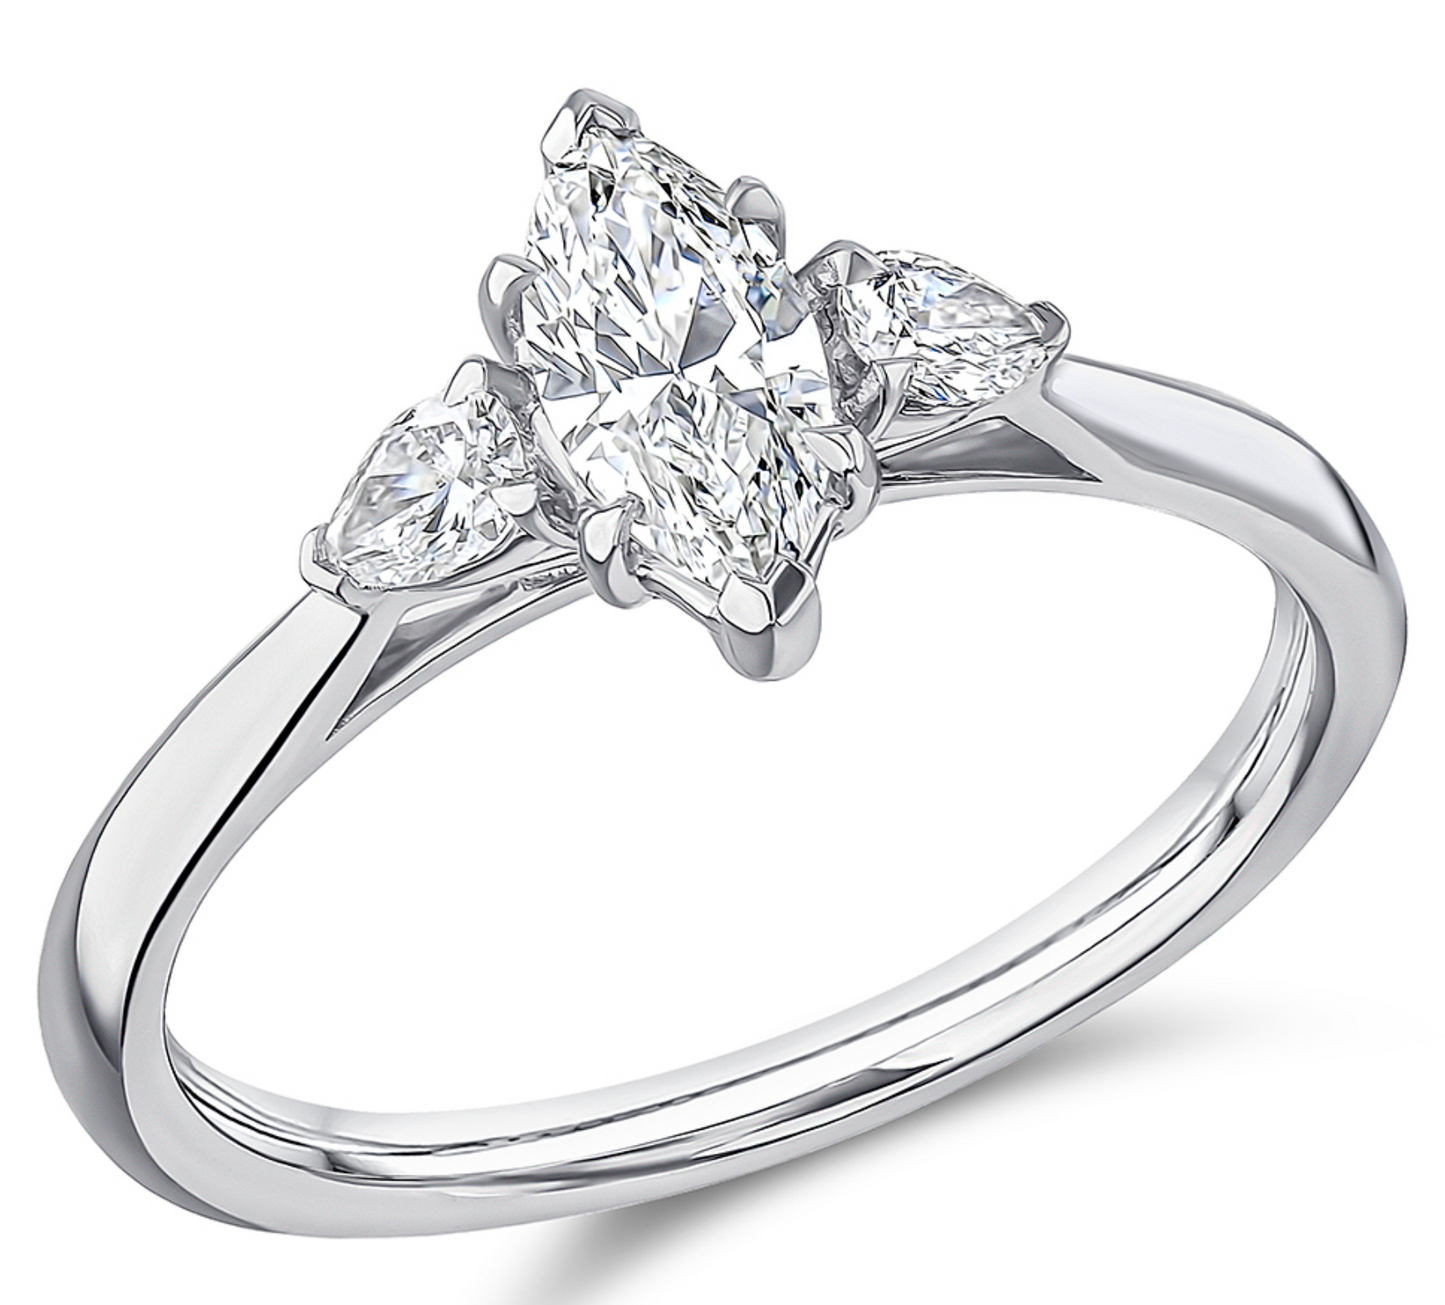 Trilogy Marquise Cut Diamond Engagement Ring 0.70ct